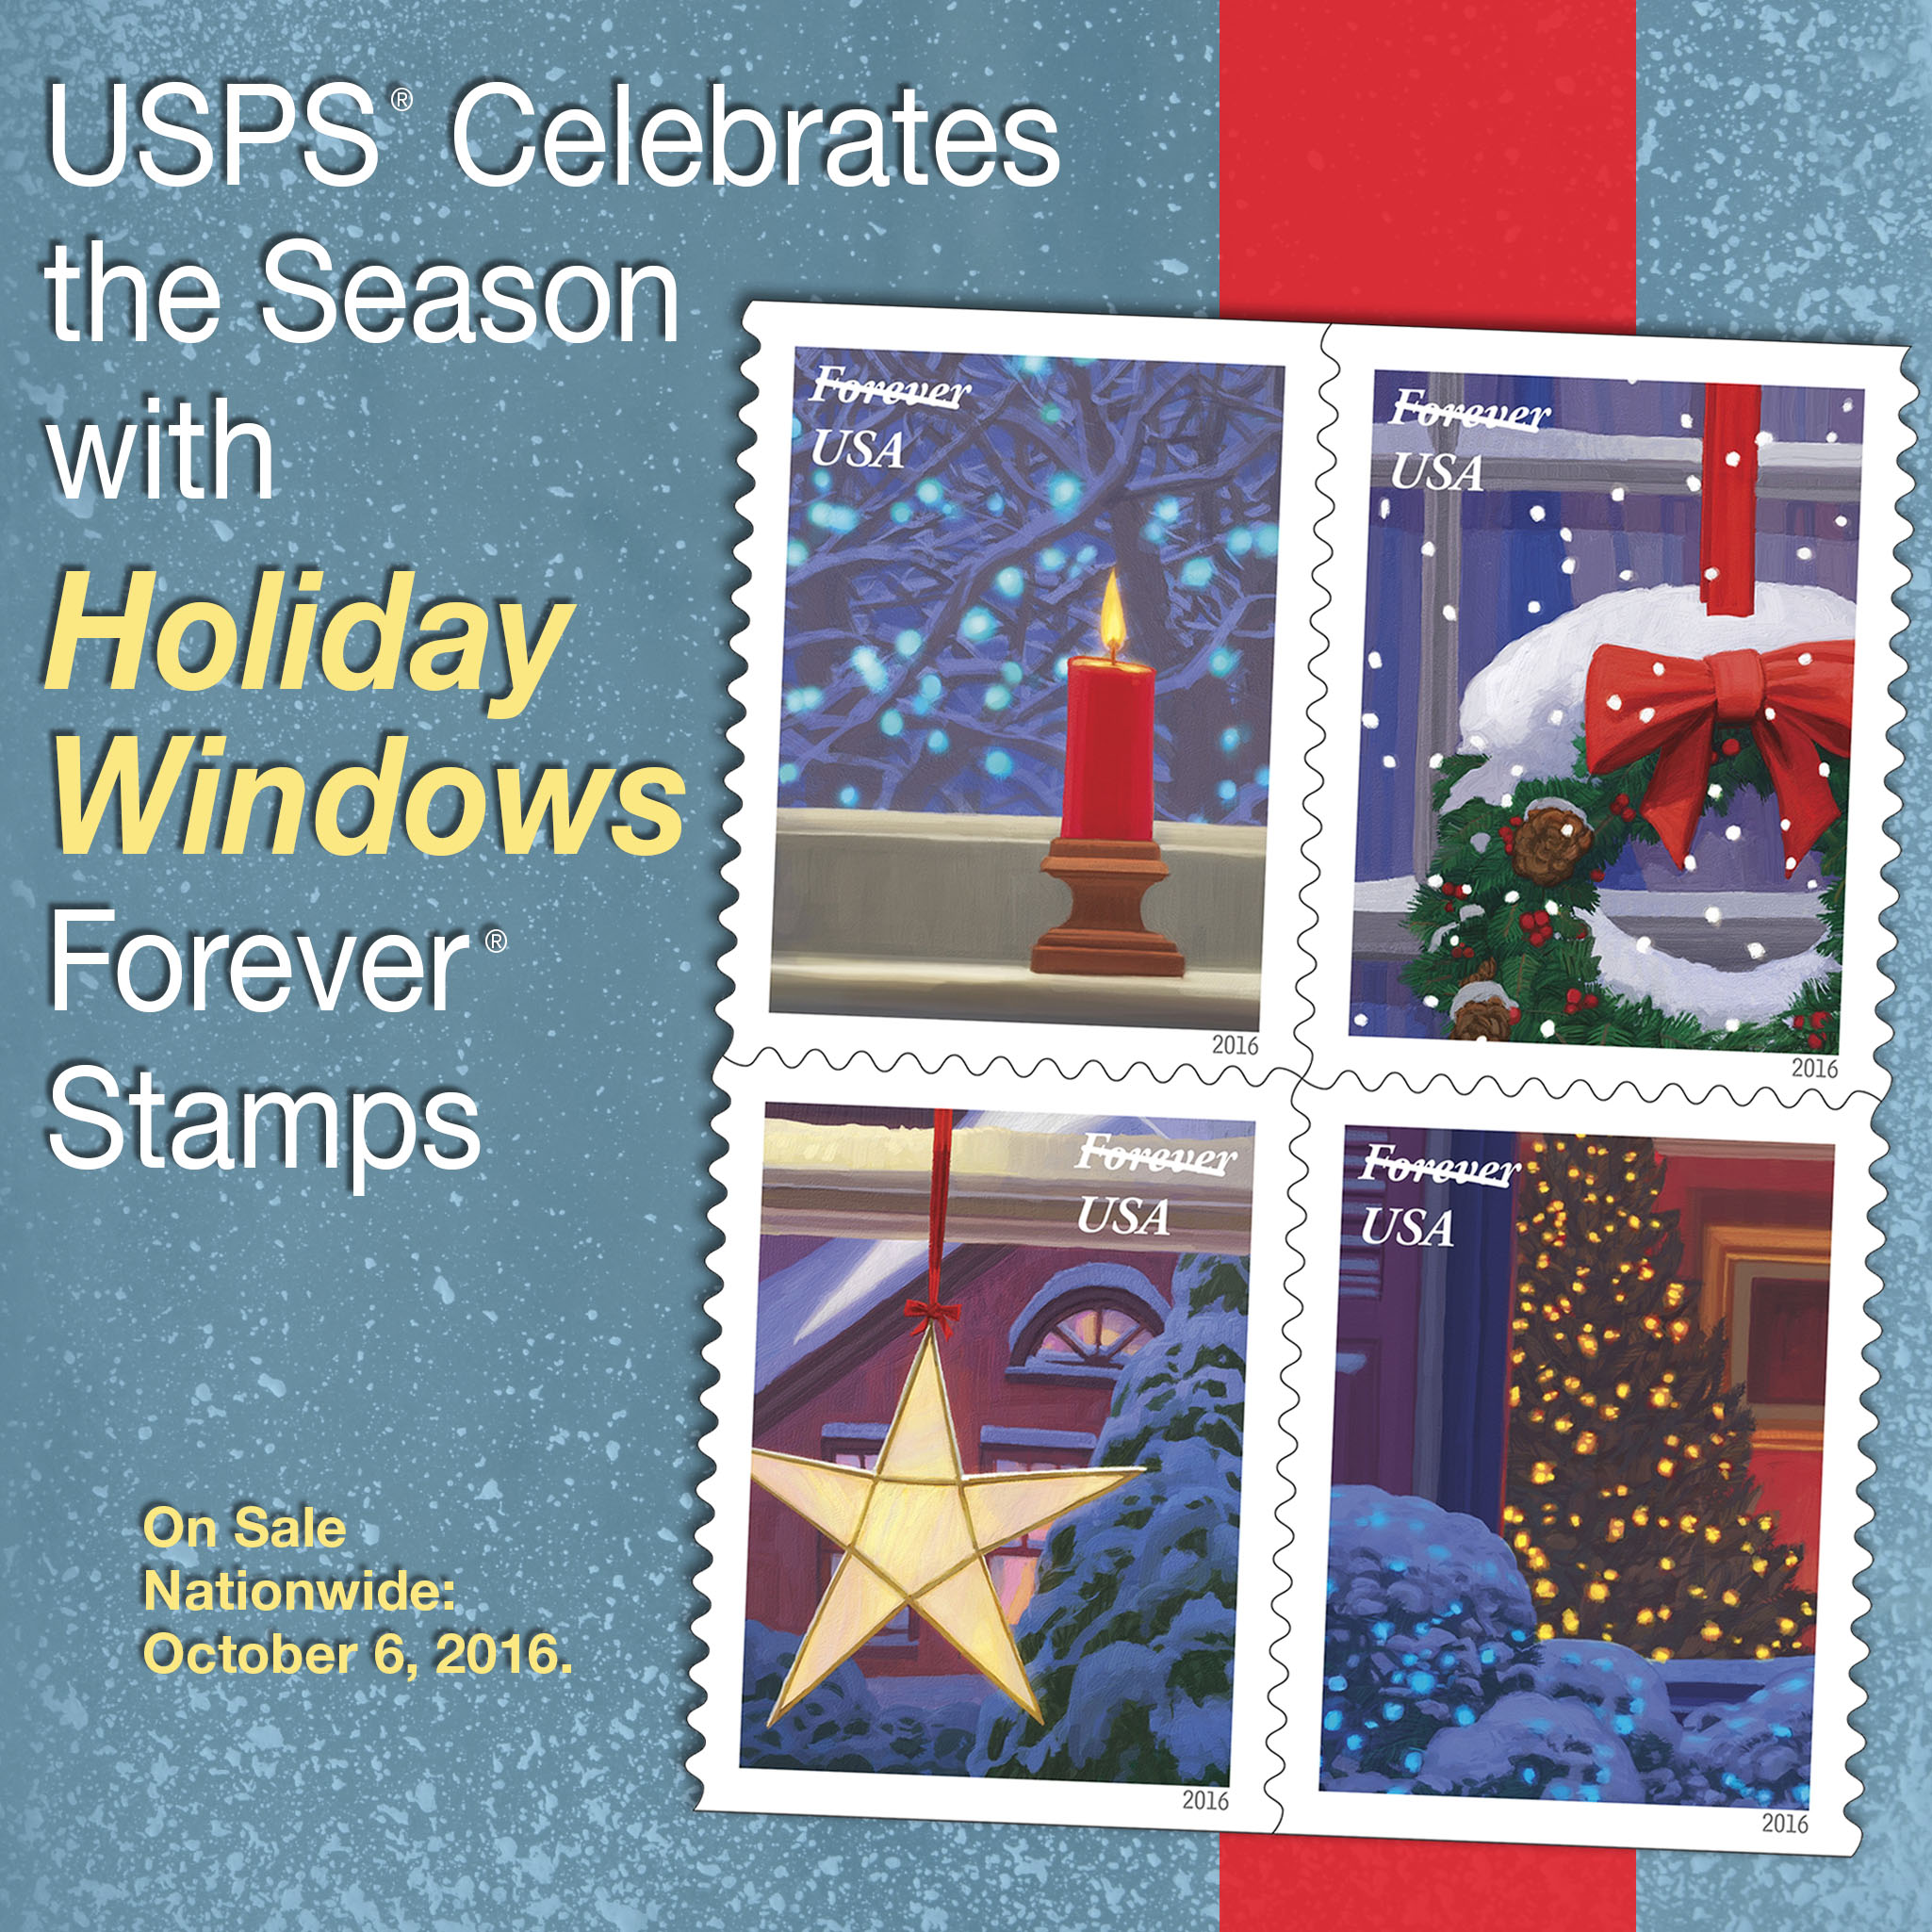 USPS Celebrates the Season with Holiday Windows Forever-On Sale Nationwide; October 6, 2016